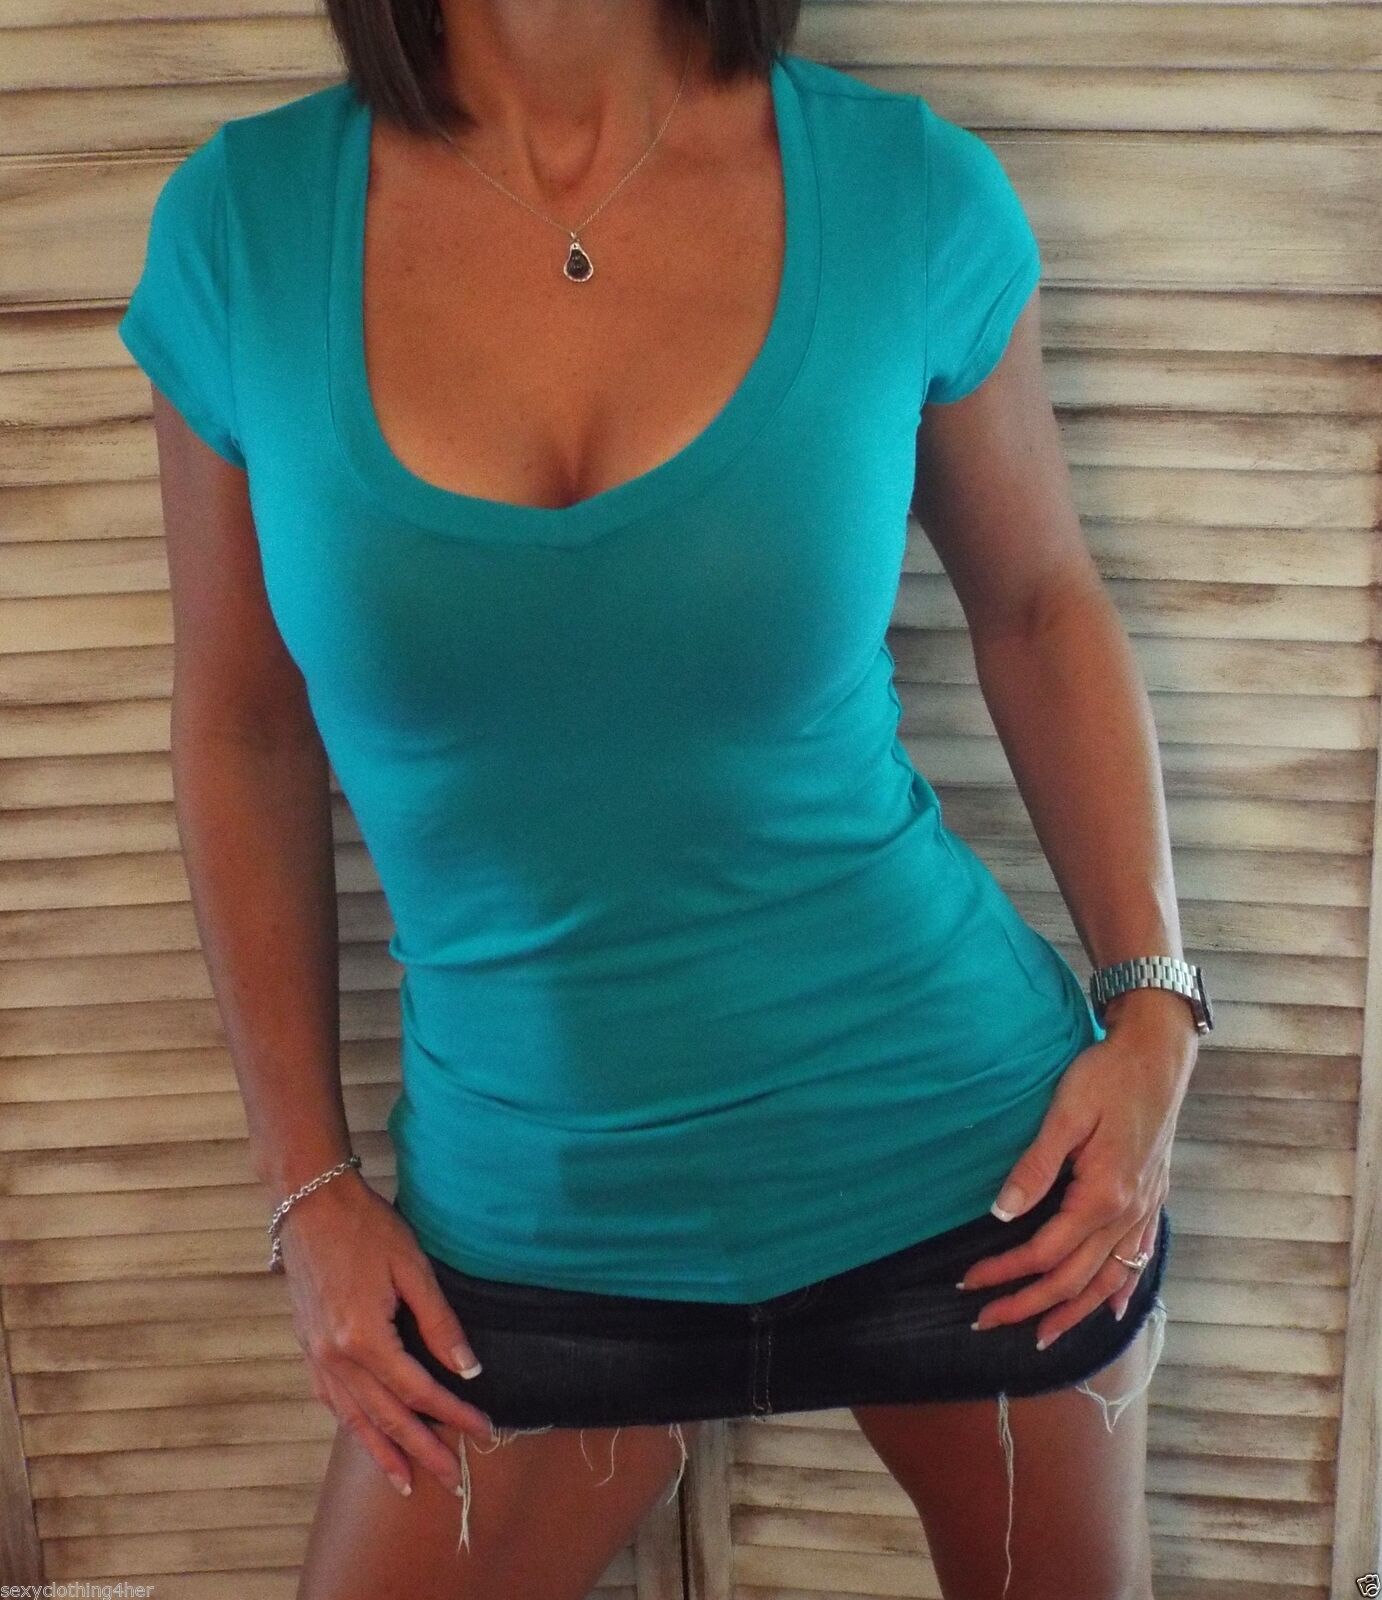 Very Sexy Low Cut V-Neck Cleavage Baby Slimming Basic Tee Shirt Teal 1X/2X/3X